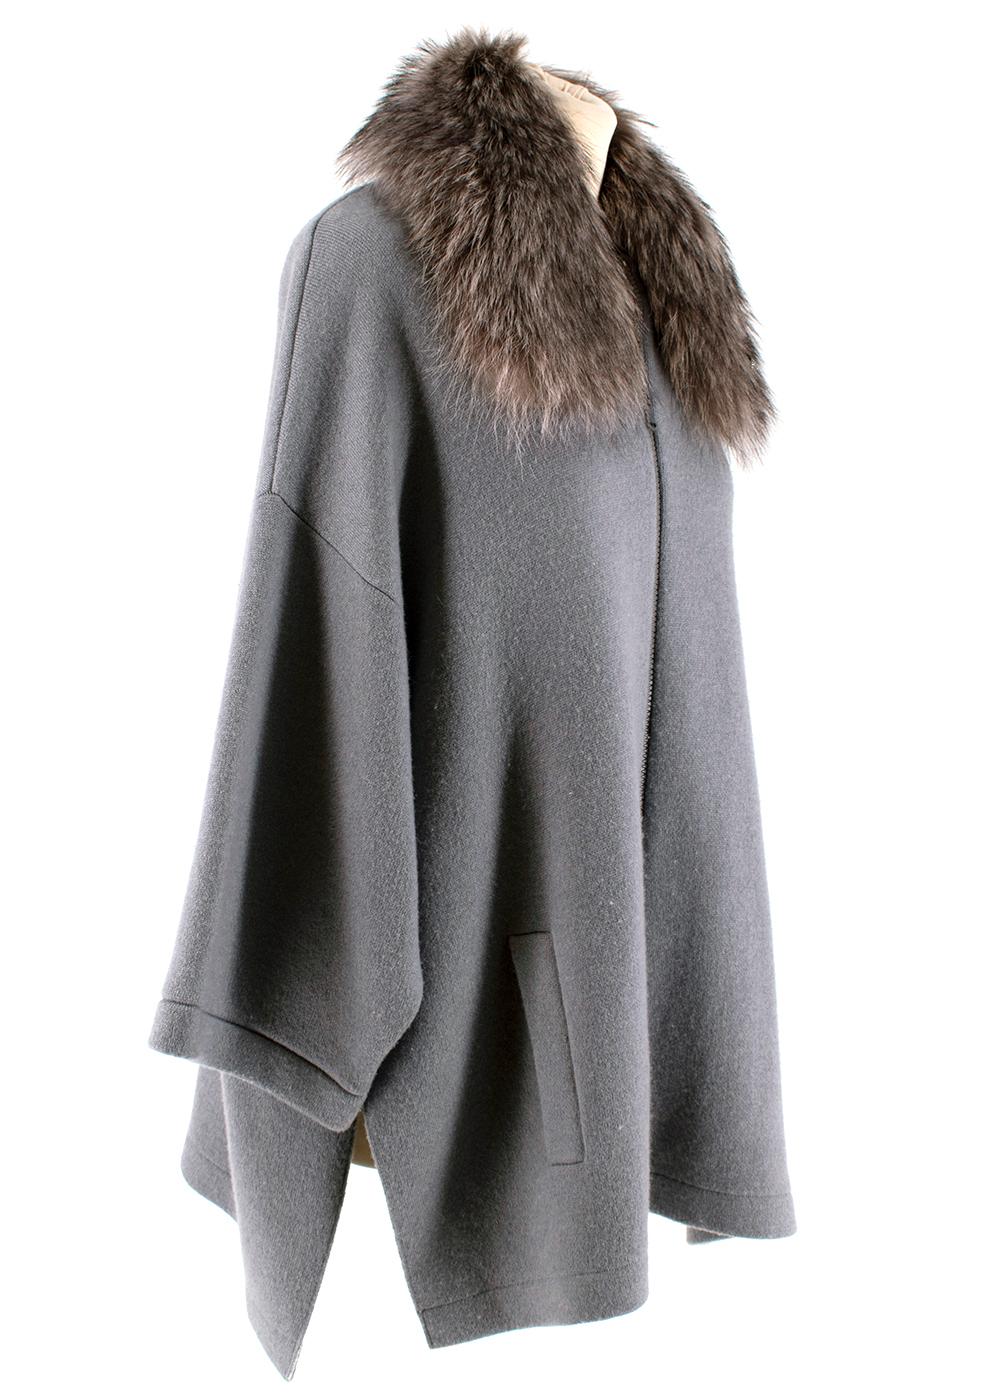 Brunello Cucinelli Grey Cashmere Knit Jacket with Raccoon Fur Collar

-Luxurious cashmere-blend
-Mid-weight, soft to touch
-Features removable Raccoon fur along the collar
-Slit detailing down the sides
-Double-zip fastening
-Two pockets at the